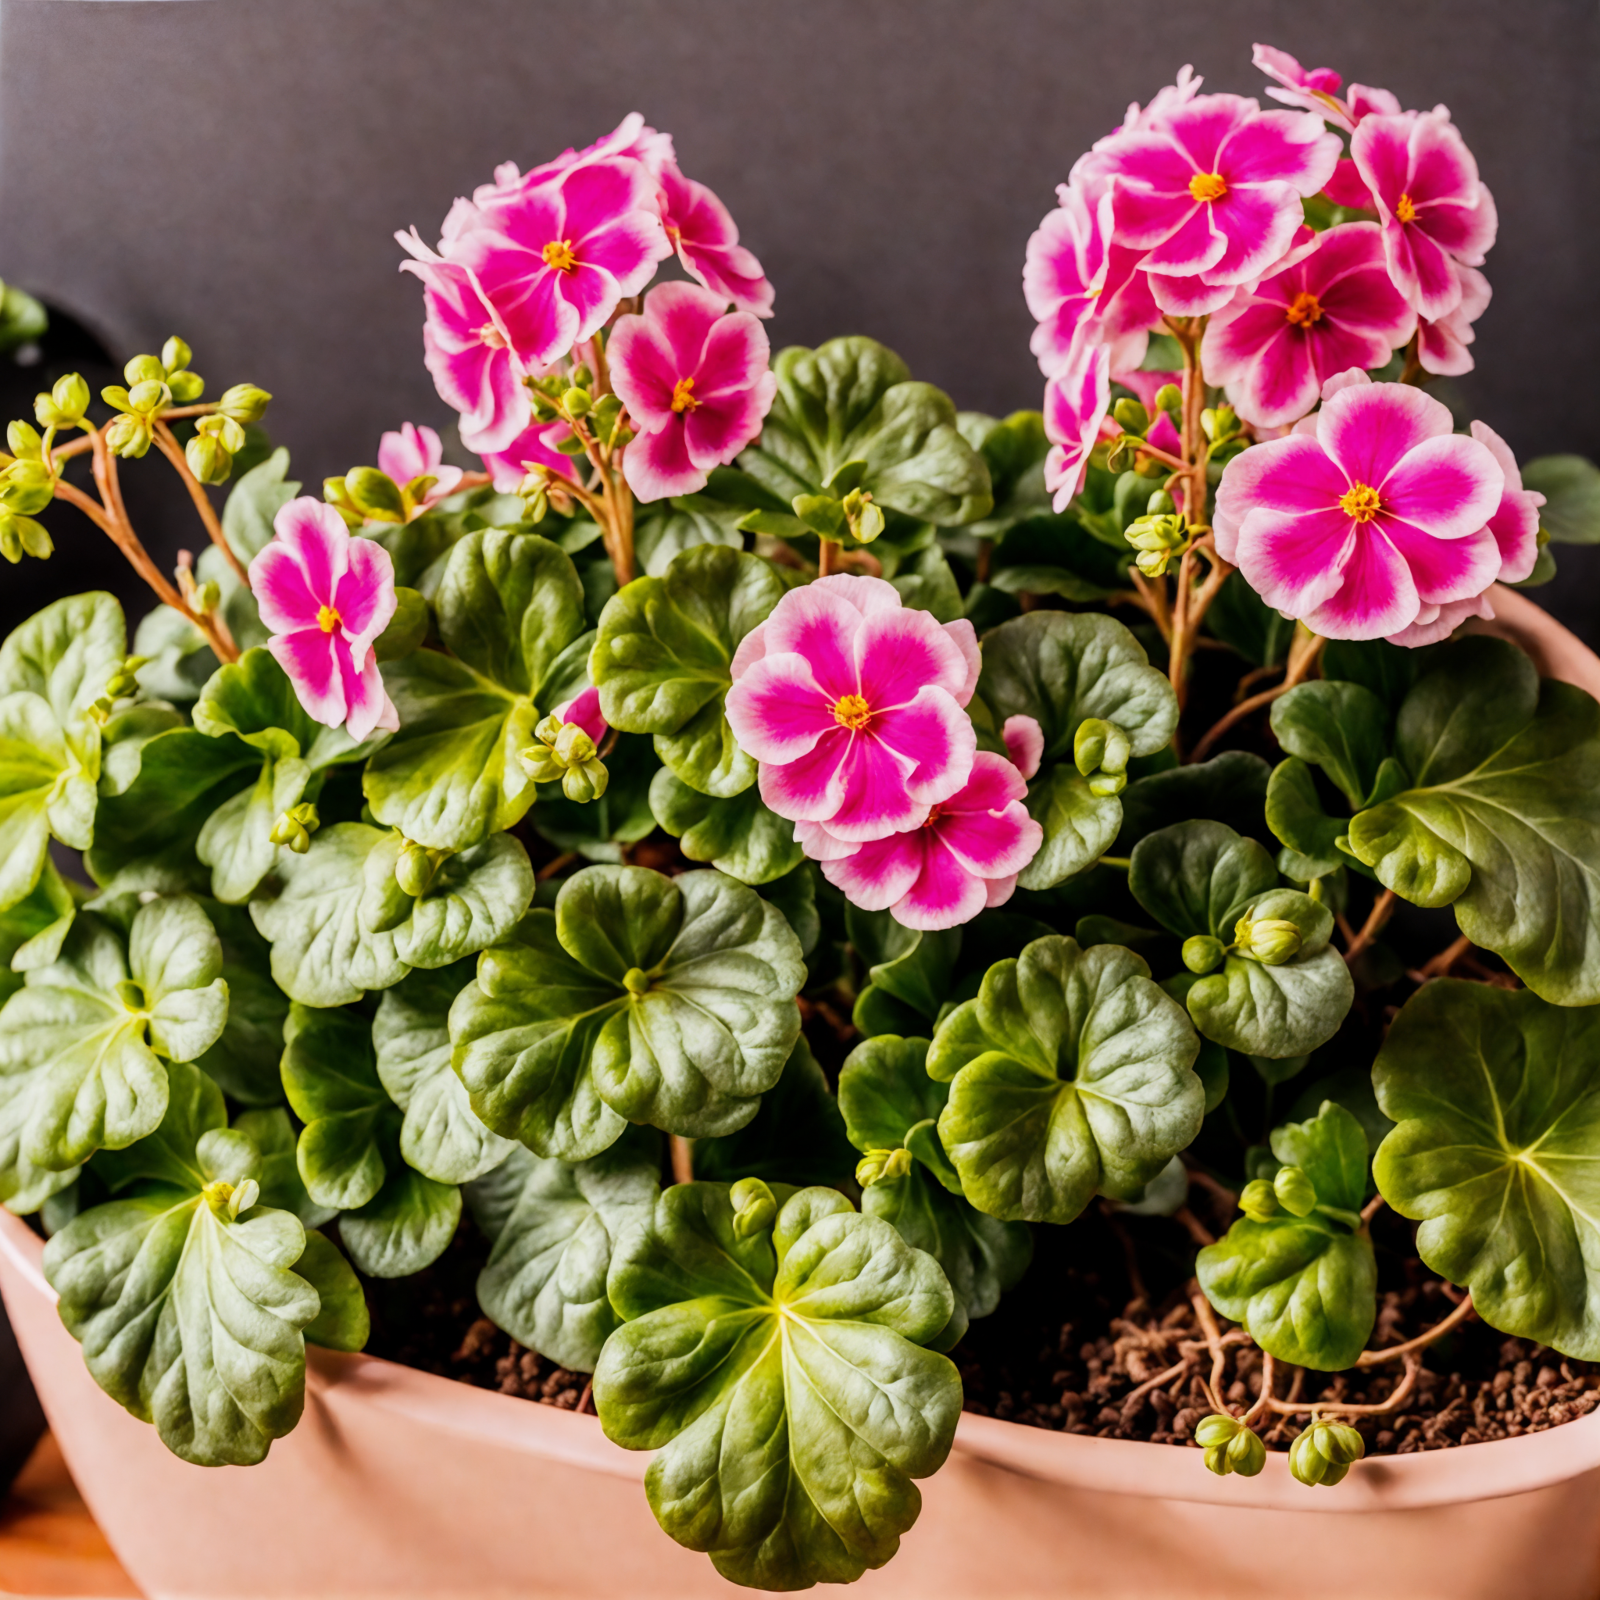 Primula obconica with pink blooms in a bowl, clear lighting, against a dark background, indoor setting.